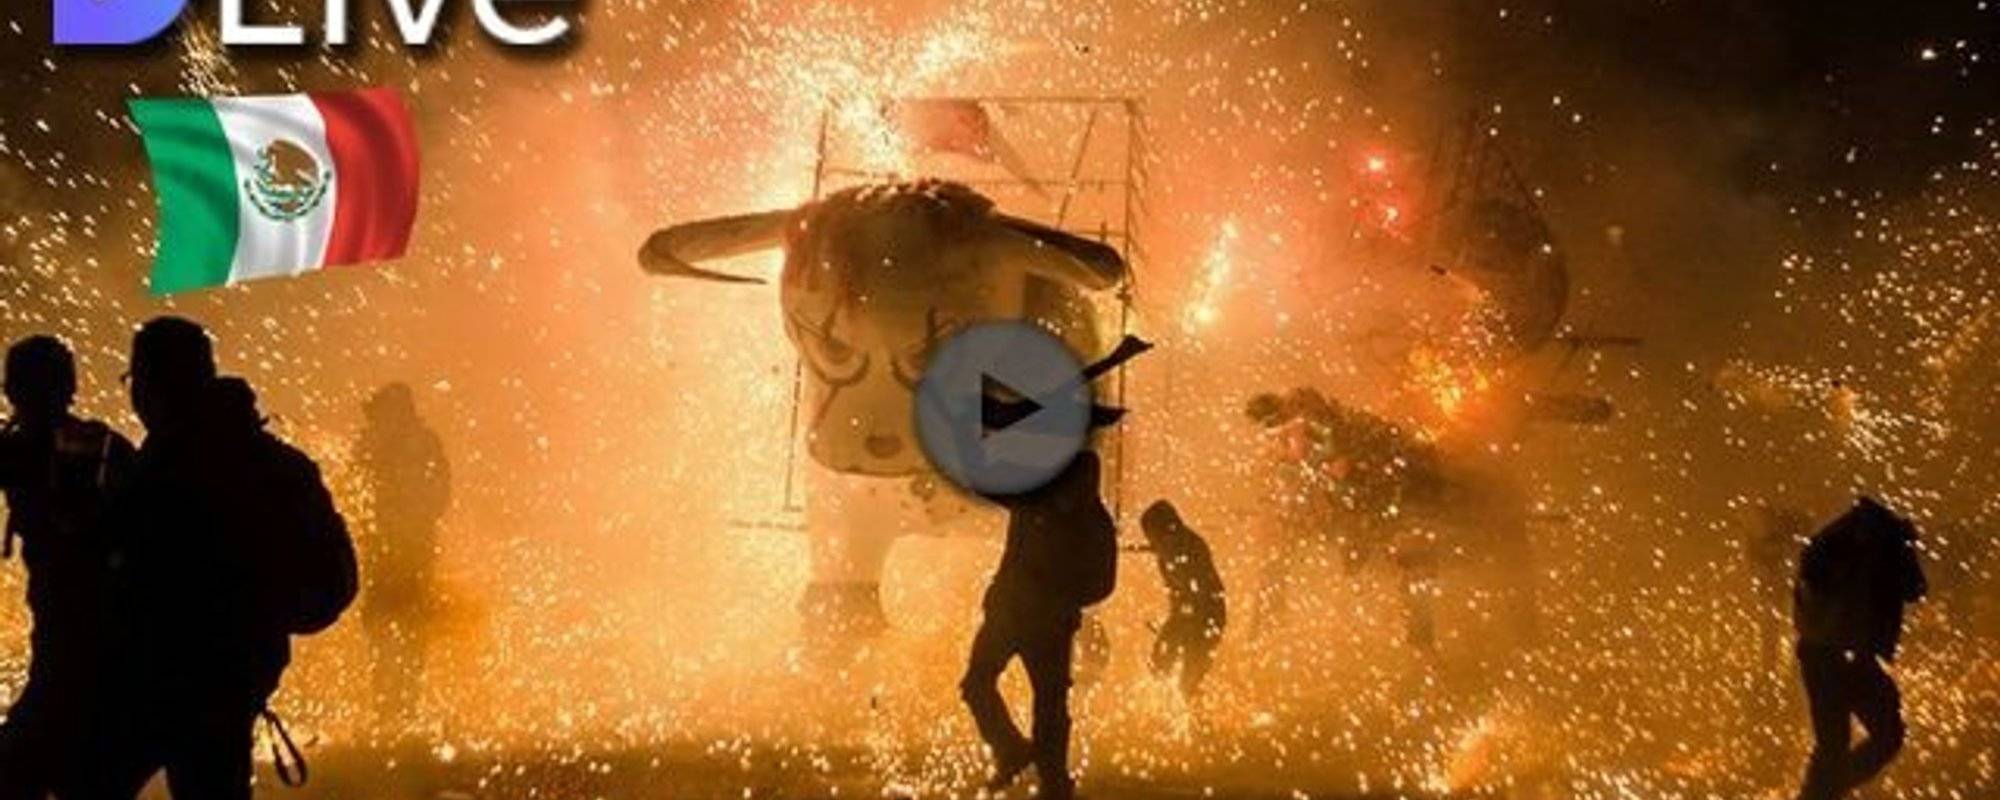 Mexico's National Pyrotechnic Festival - The World's Most INSANE Festival